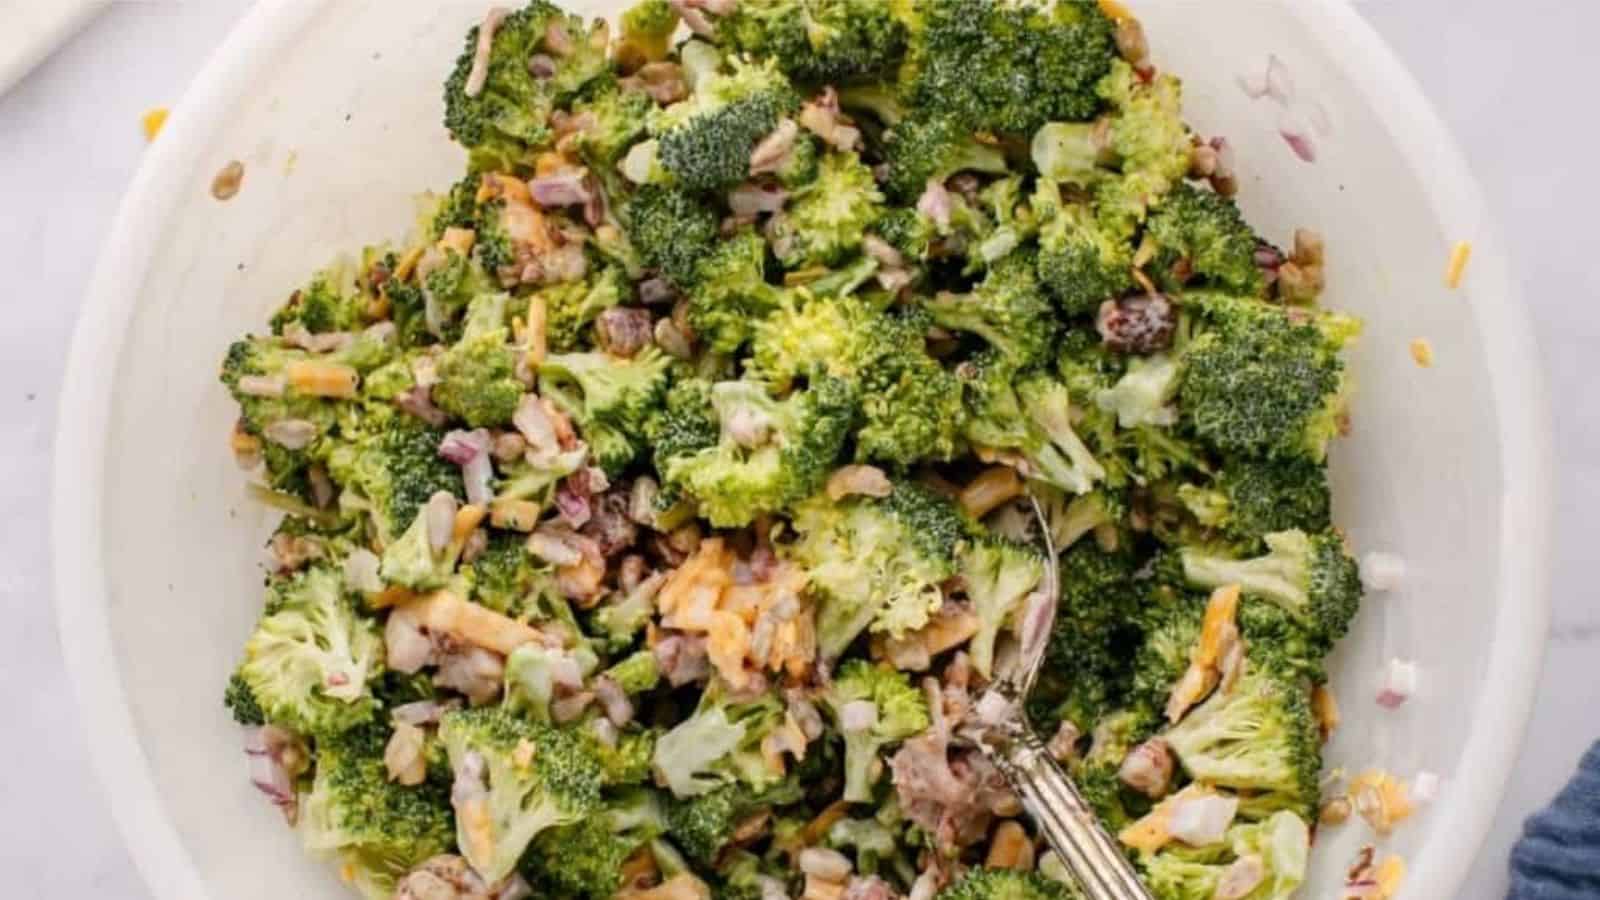 Top view of Broccoli Crunch Salad in a bowl with a spoon.